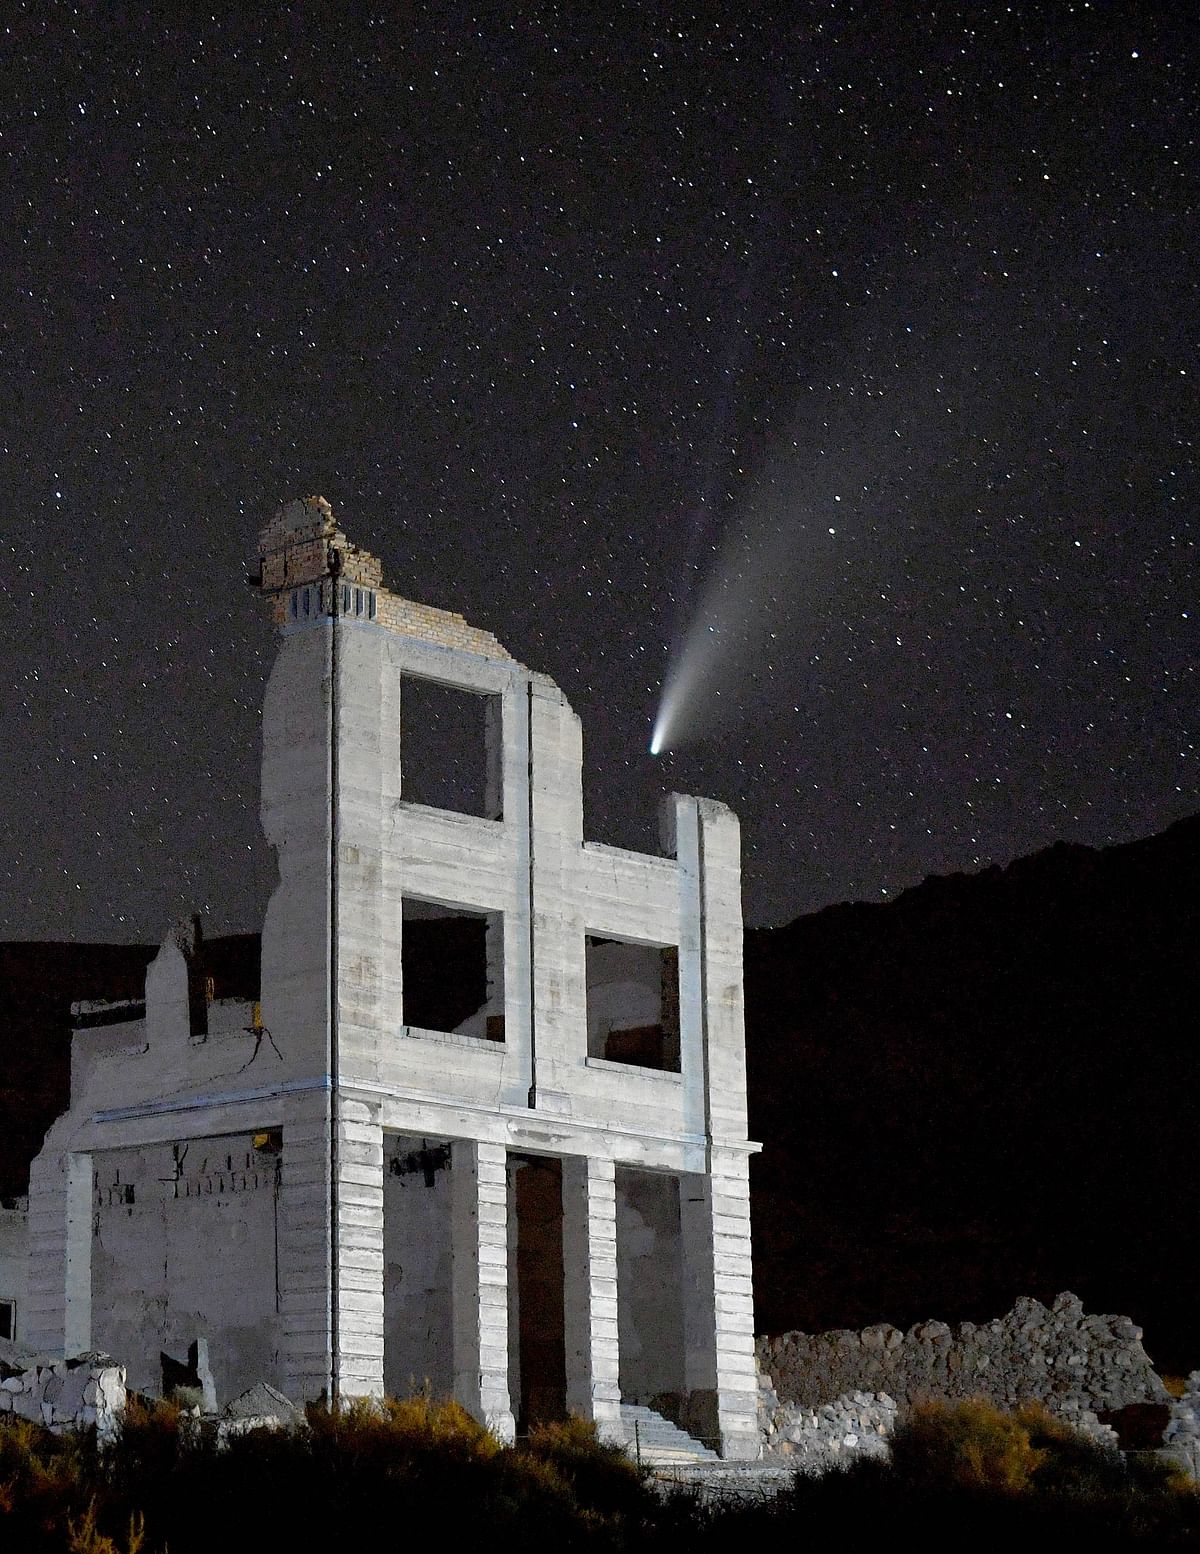 The Comet NEOWISE (C/2020 F3) is seen above the ruins of the Cook Bank building on July 20, 2020 in the ghost town of Rhyolite, Nevada. The comet is named after NASA's Near-Earth Object Wide-field Infrared Survey Explorer, which discovered it in March. It is about 3 miles wide and 70 million miles from Earth while traveling at 144,000 mph as it moves away from the sun. Credit: Getty Images/AFP